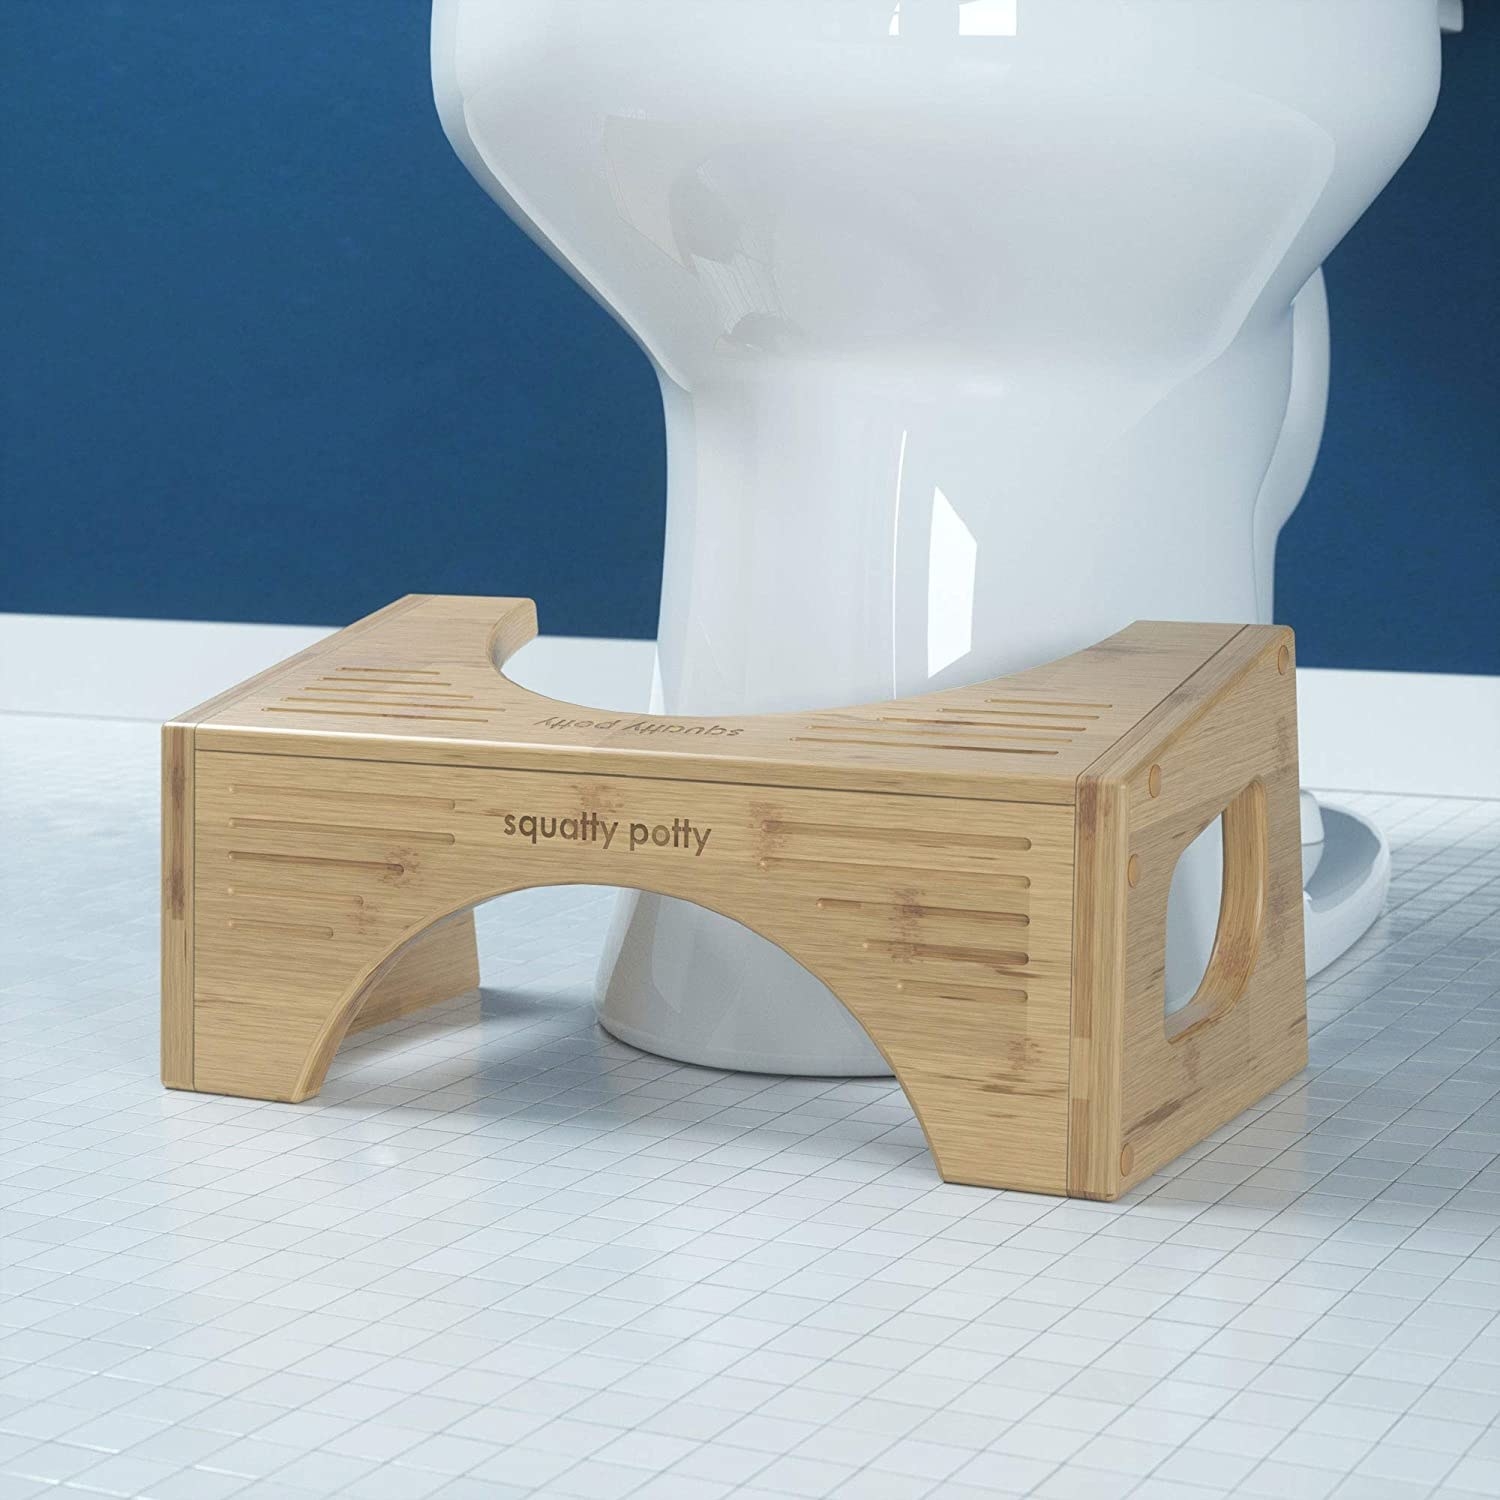 The bamboo stool in front of a toilet